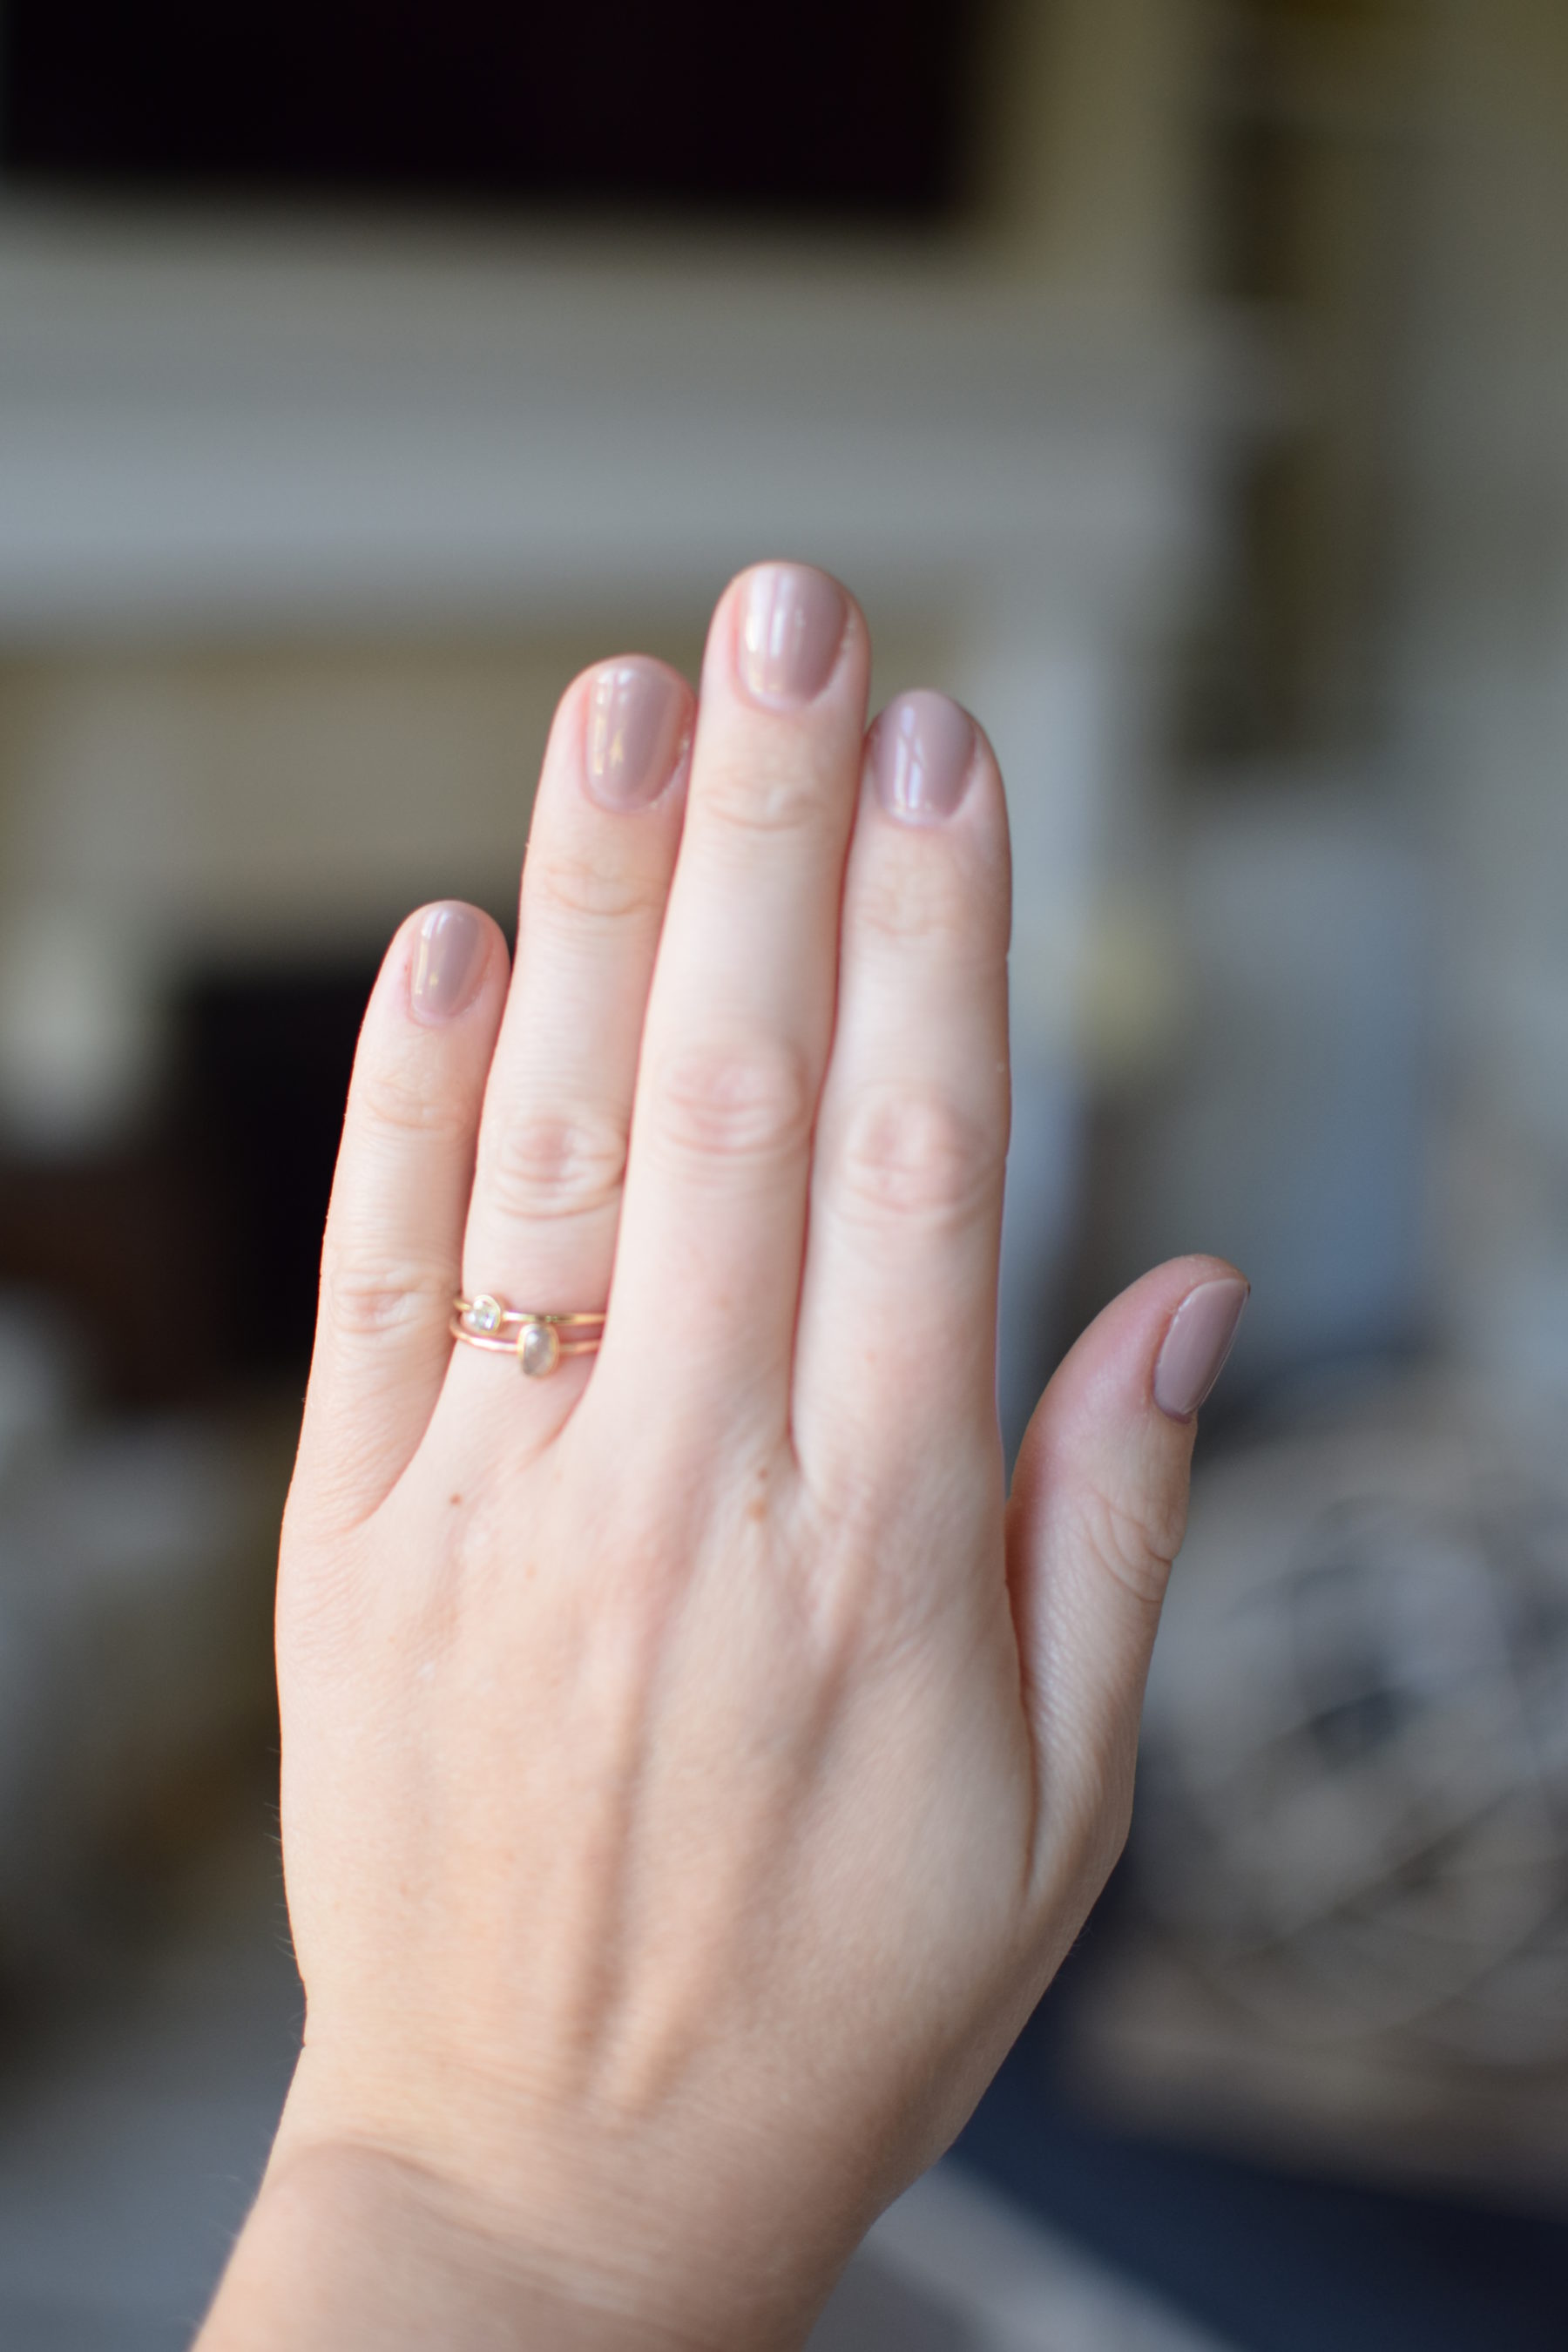 At home gel manicures are not as hard as you think – The Small Things Blog